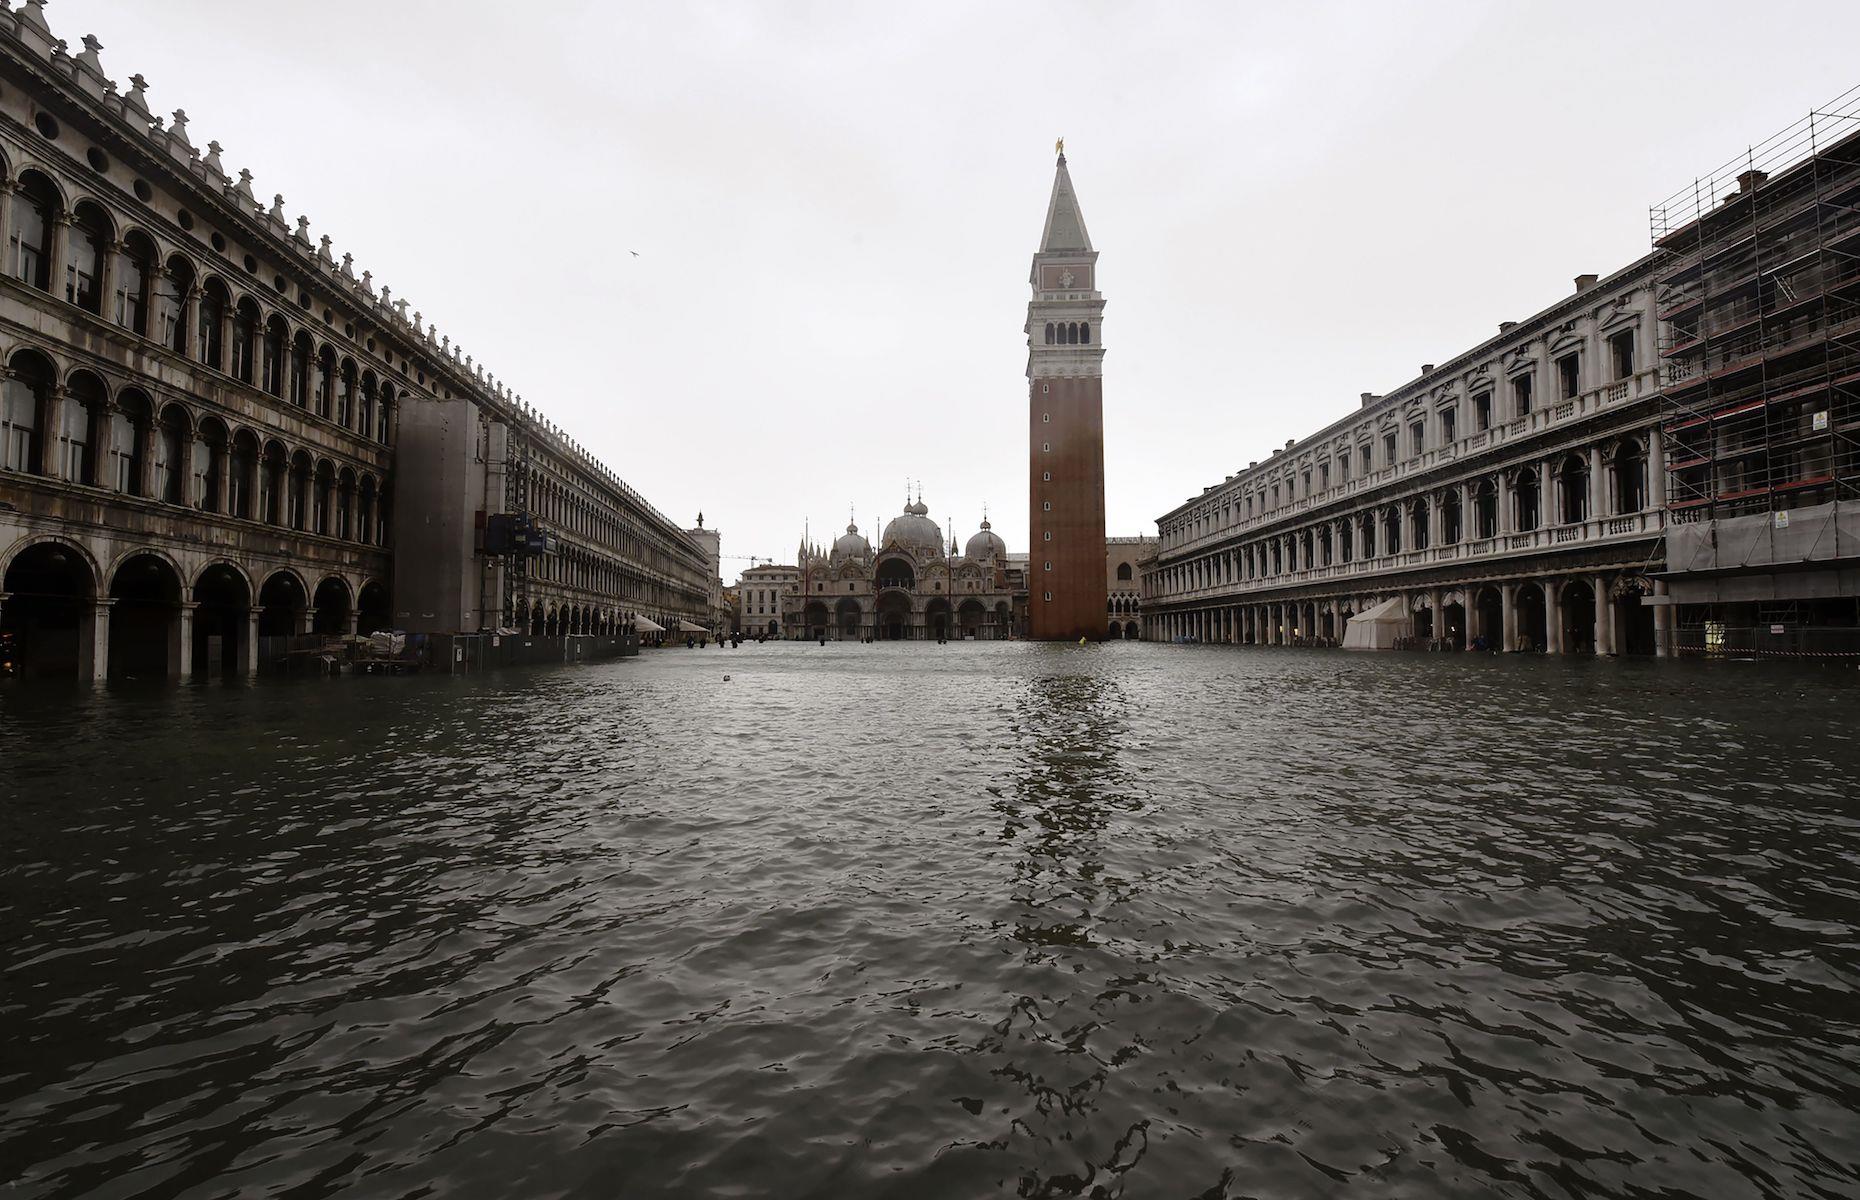 Water is intertwined with the Venetian way of life and culture, but it’s also threatening its existence. The low-lying city faces seasonal flooding, known as acqua alta, four times a year but the frequency and severity is increasing. In November 2019, Venice was hit by the worst flooding since the Great Flood of 1966 following high tides and powerful storms. Many iconic buildings were damaged, including St Mark's Basilica.